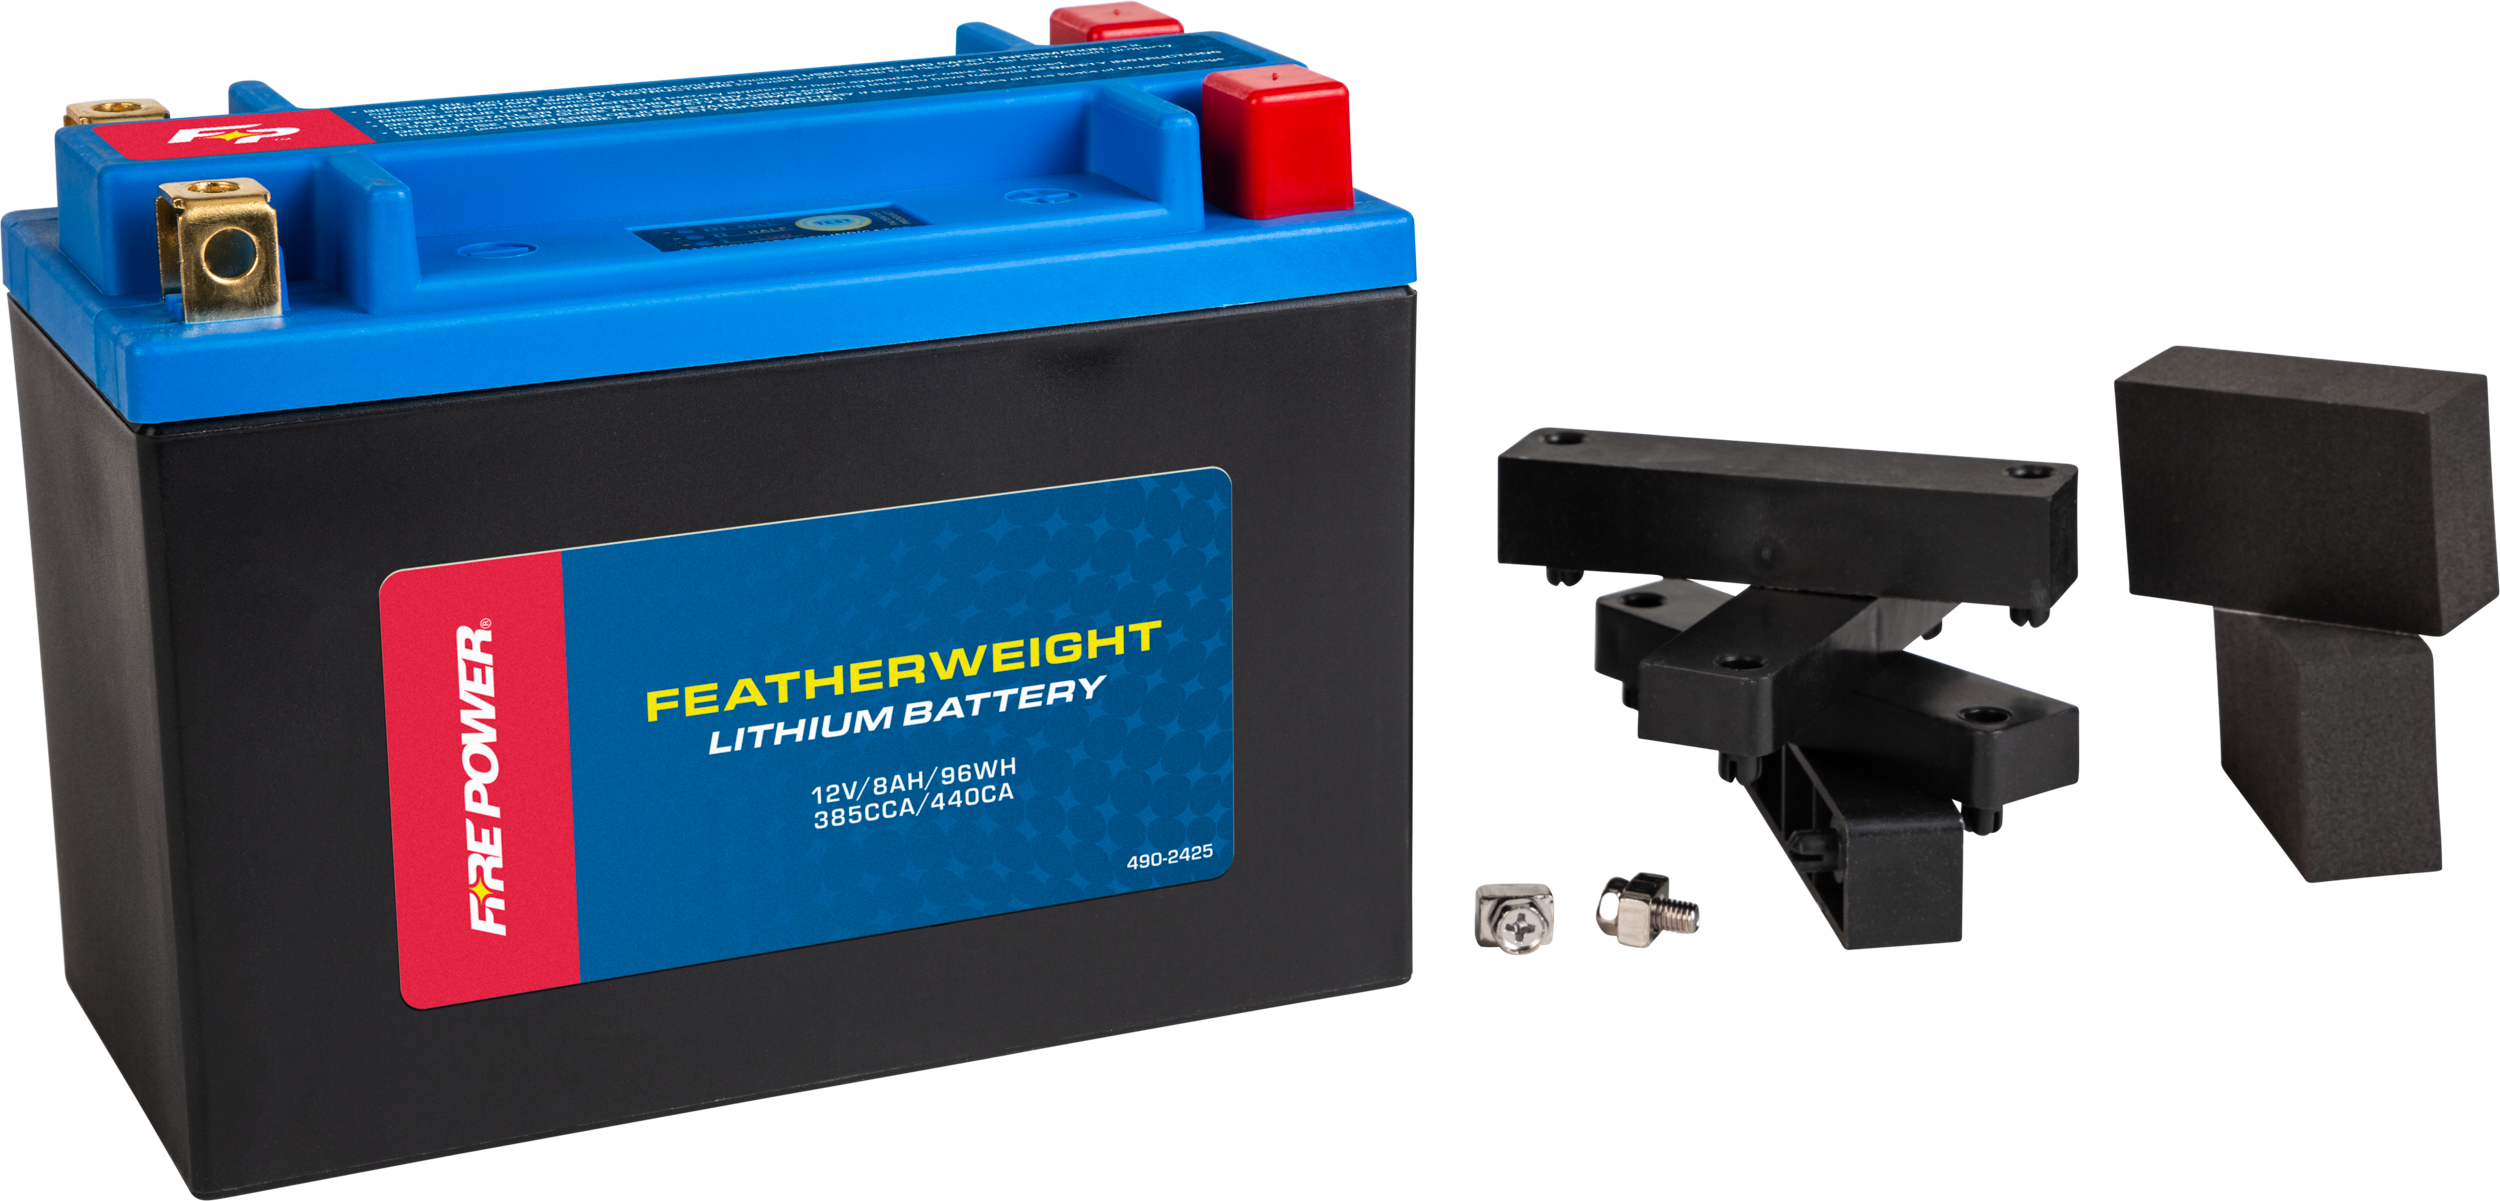 Fire Power - Featherweight Lithium Battery 385 Cca 12v/96wh - HJTX20HQ-FP-B